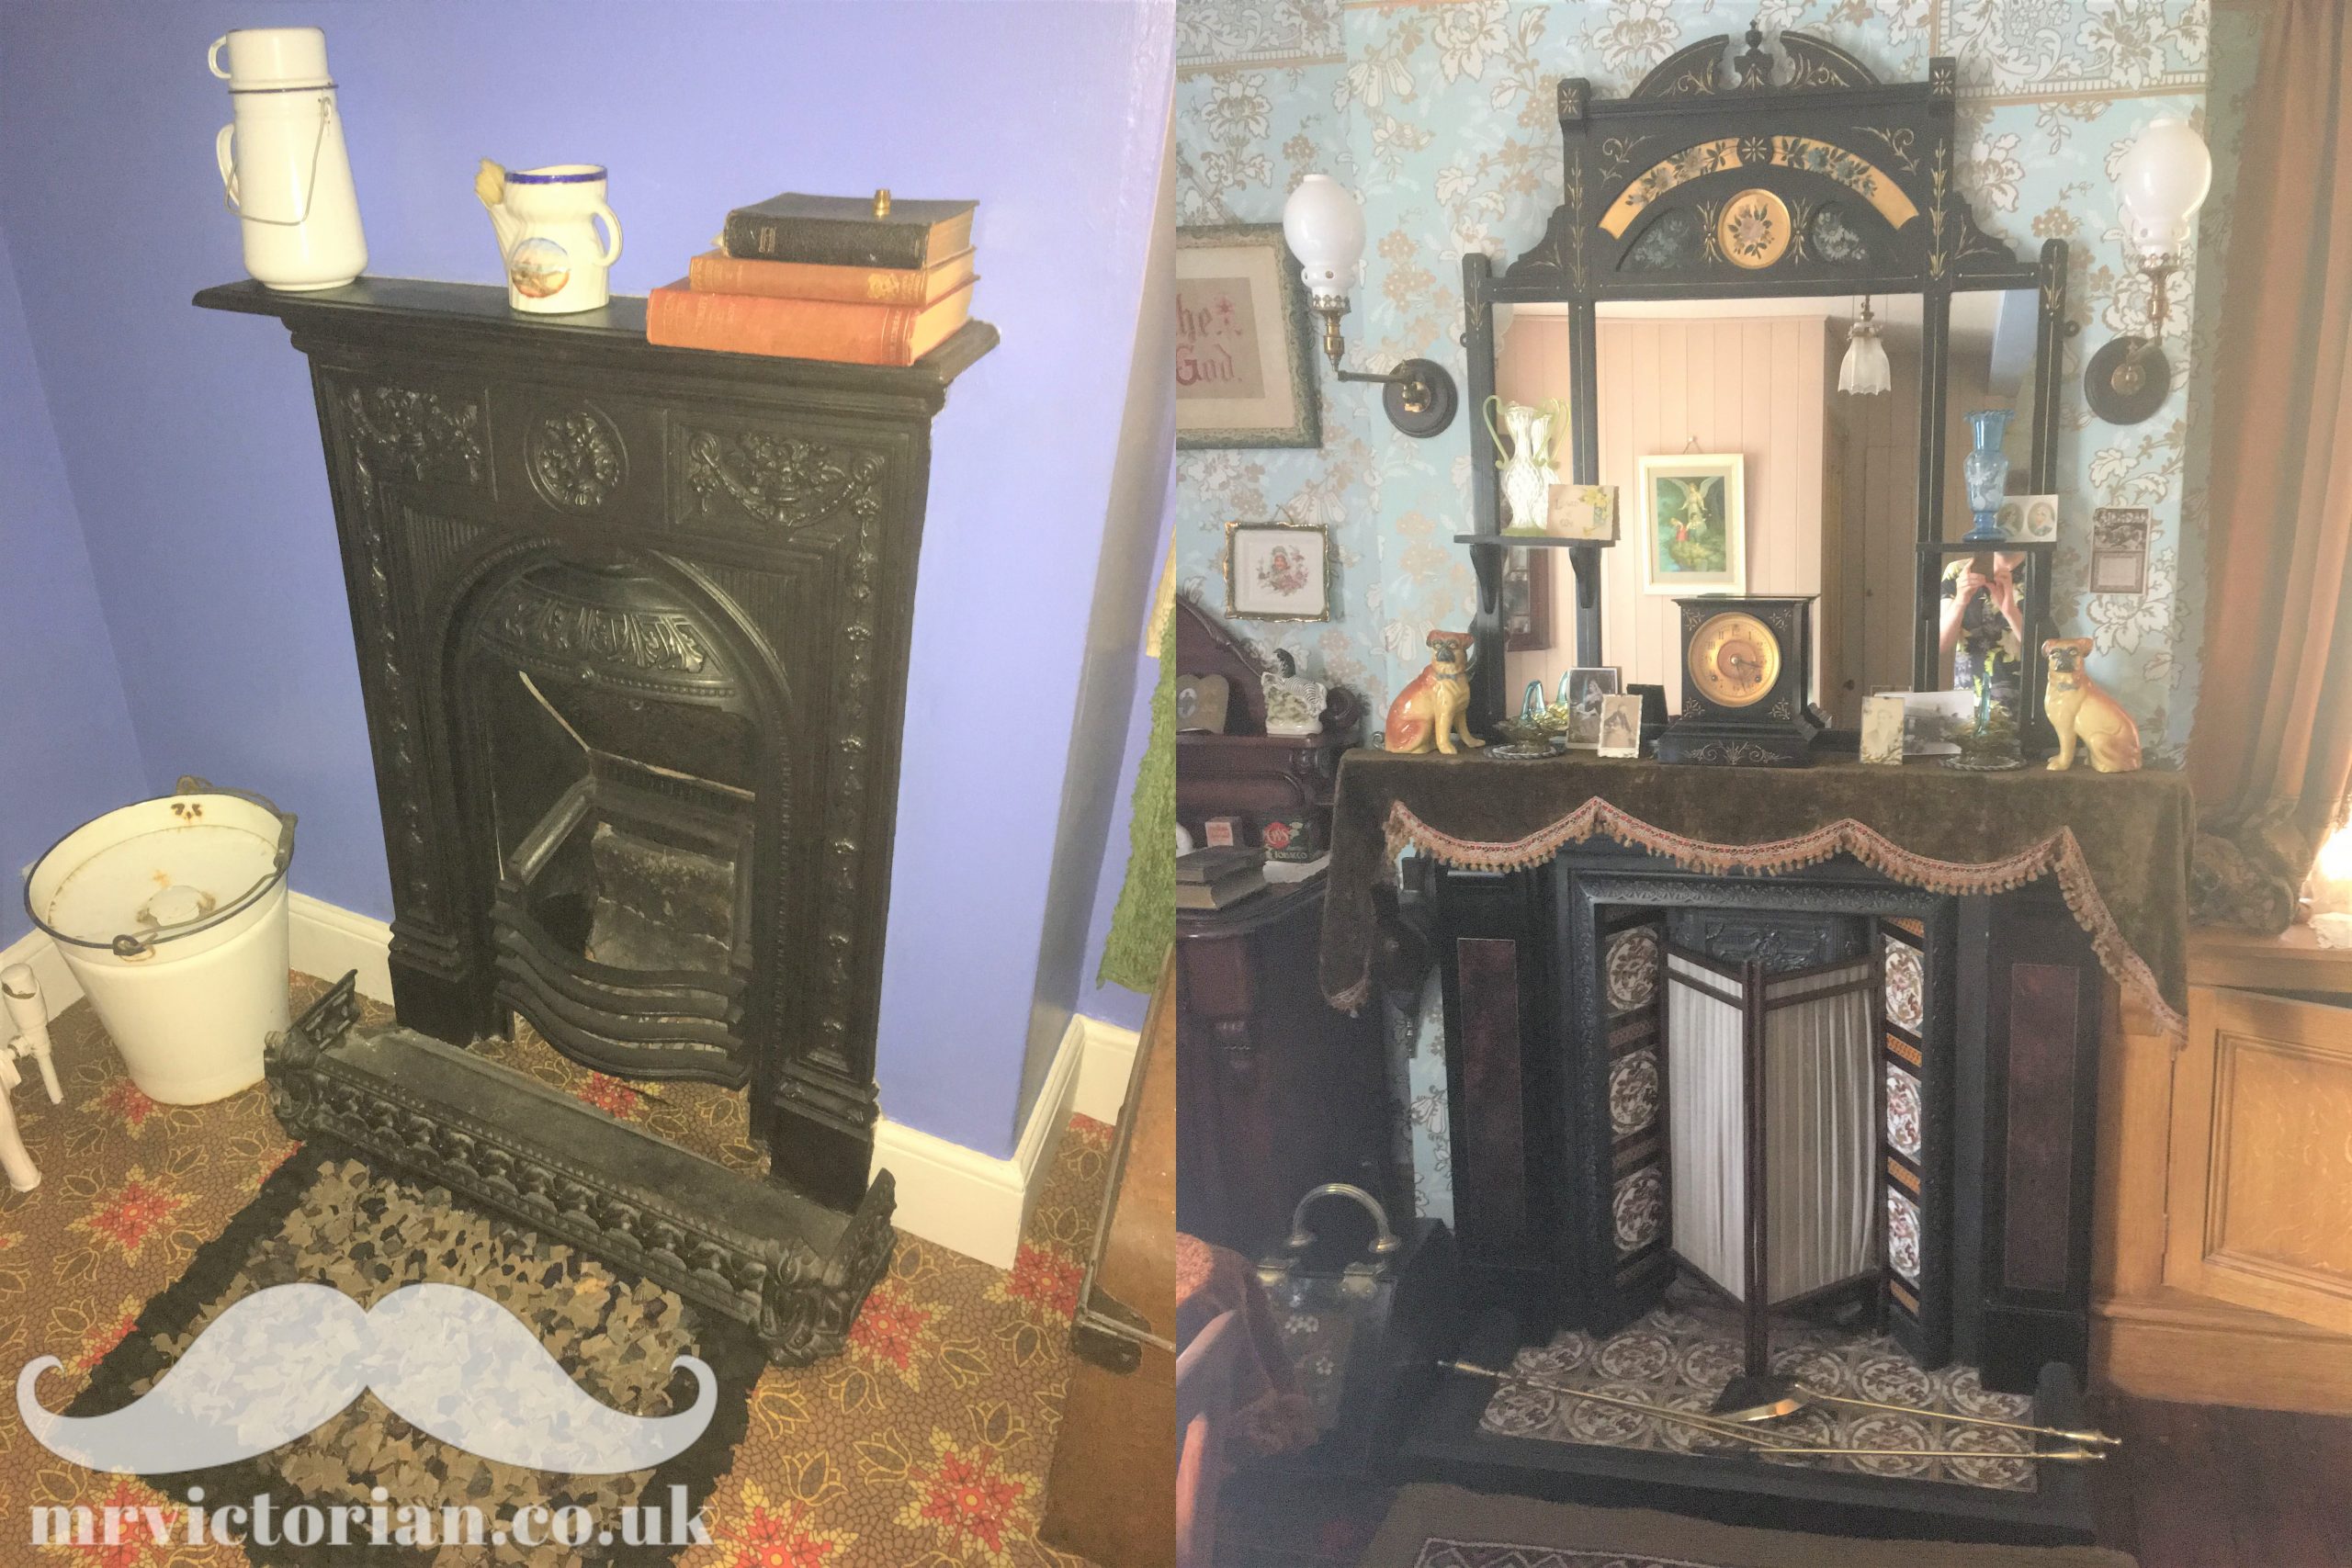 Two photographs show a small bedroom fireplace and a grander tiled parlour fireplace with slate surround. 